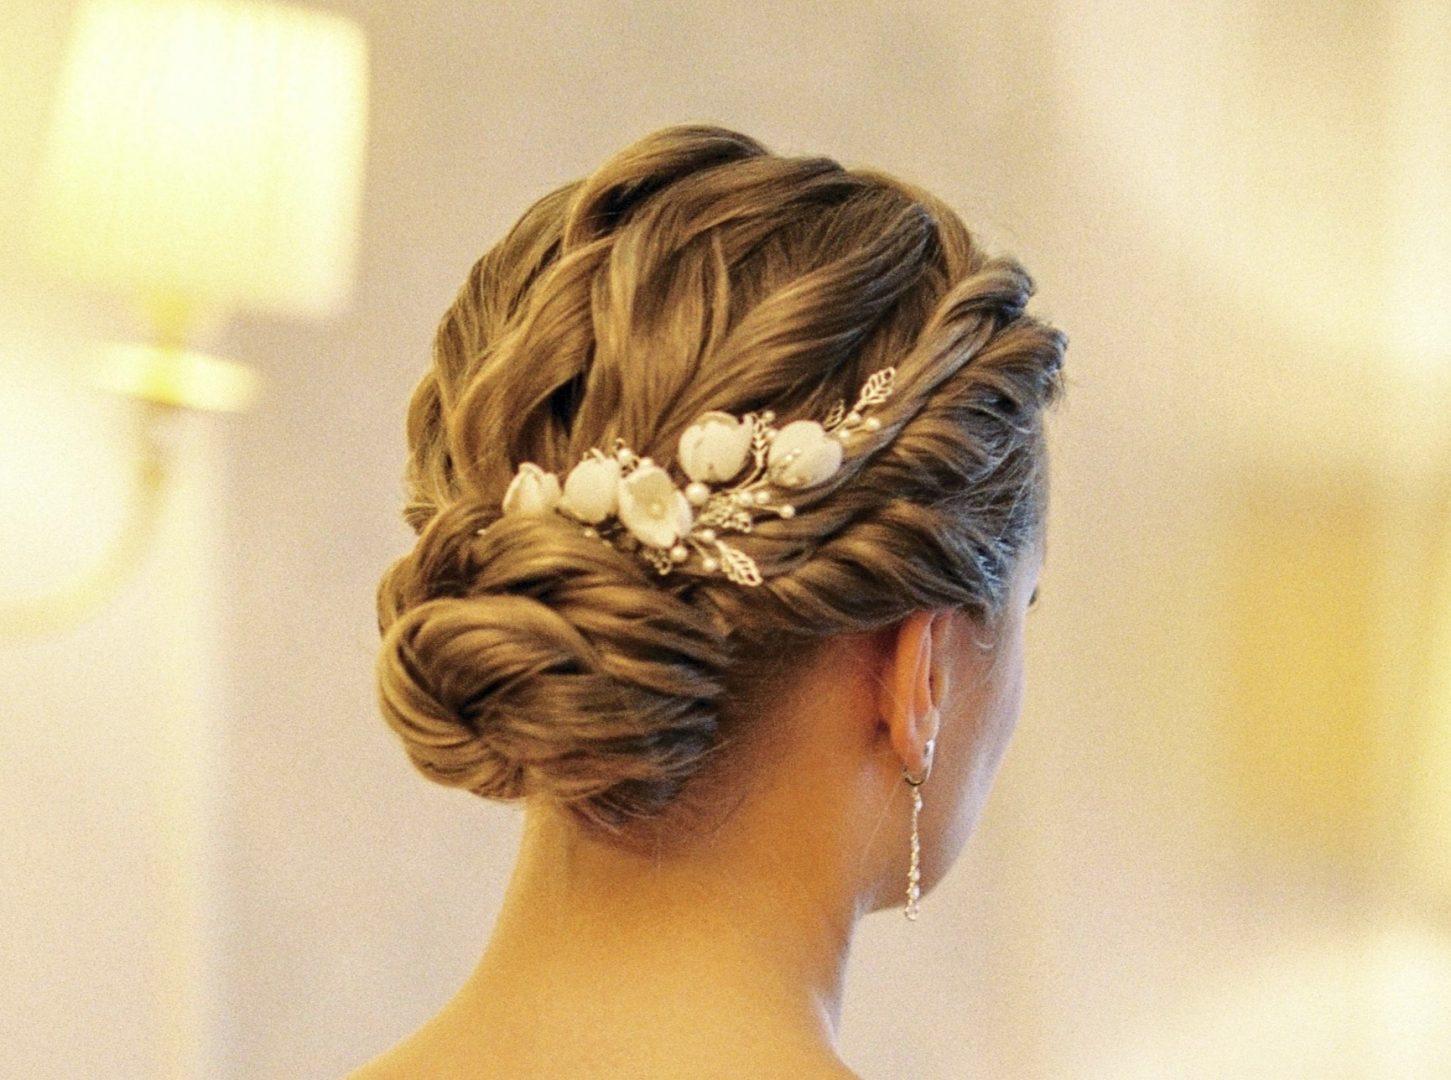 Stunning Prom Hairstyle Ideas for Your Big Night